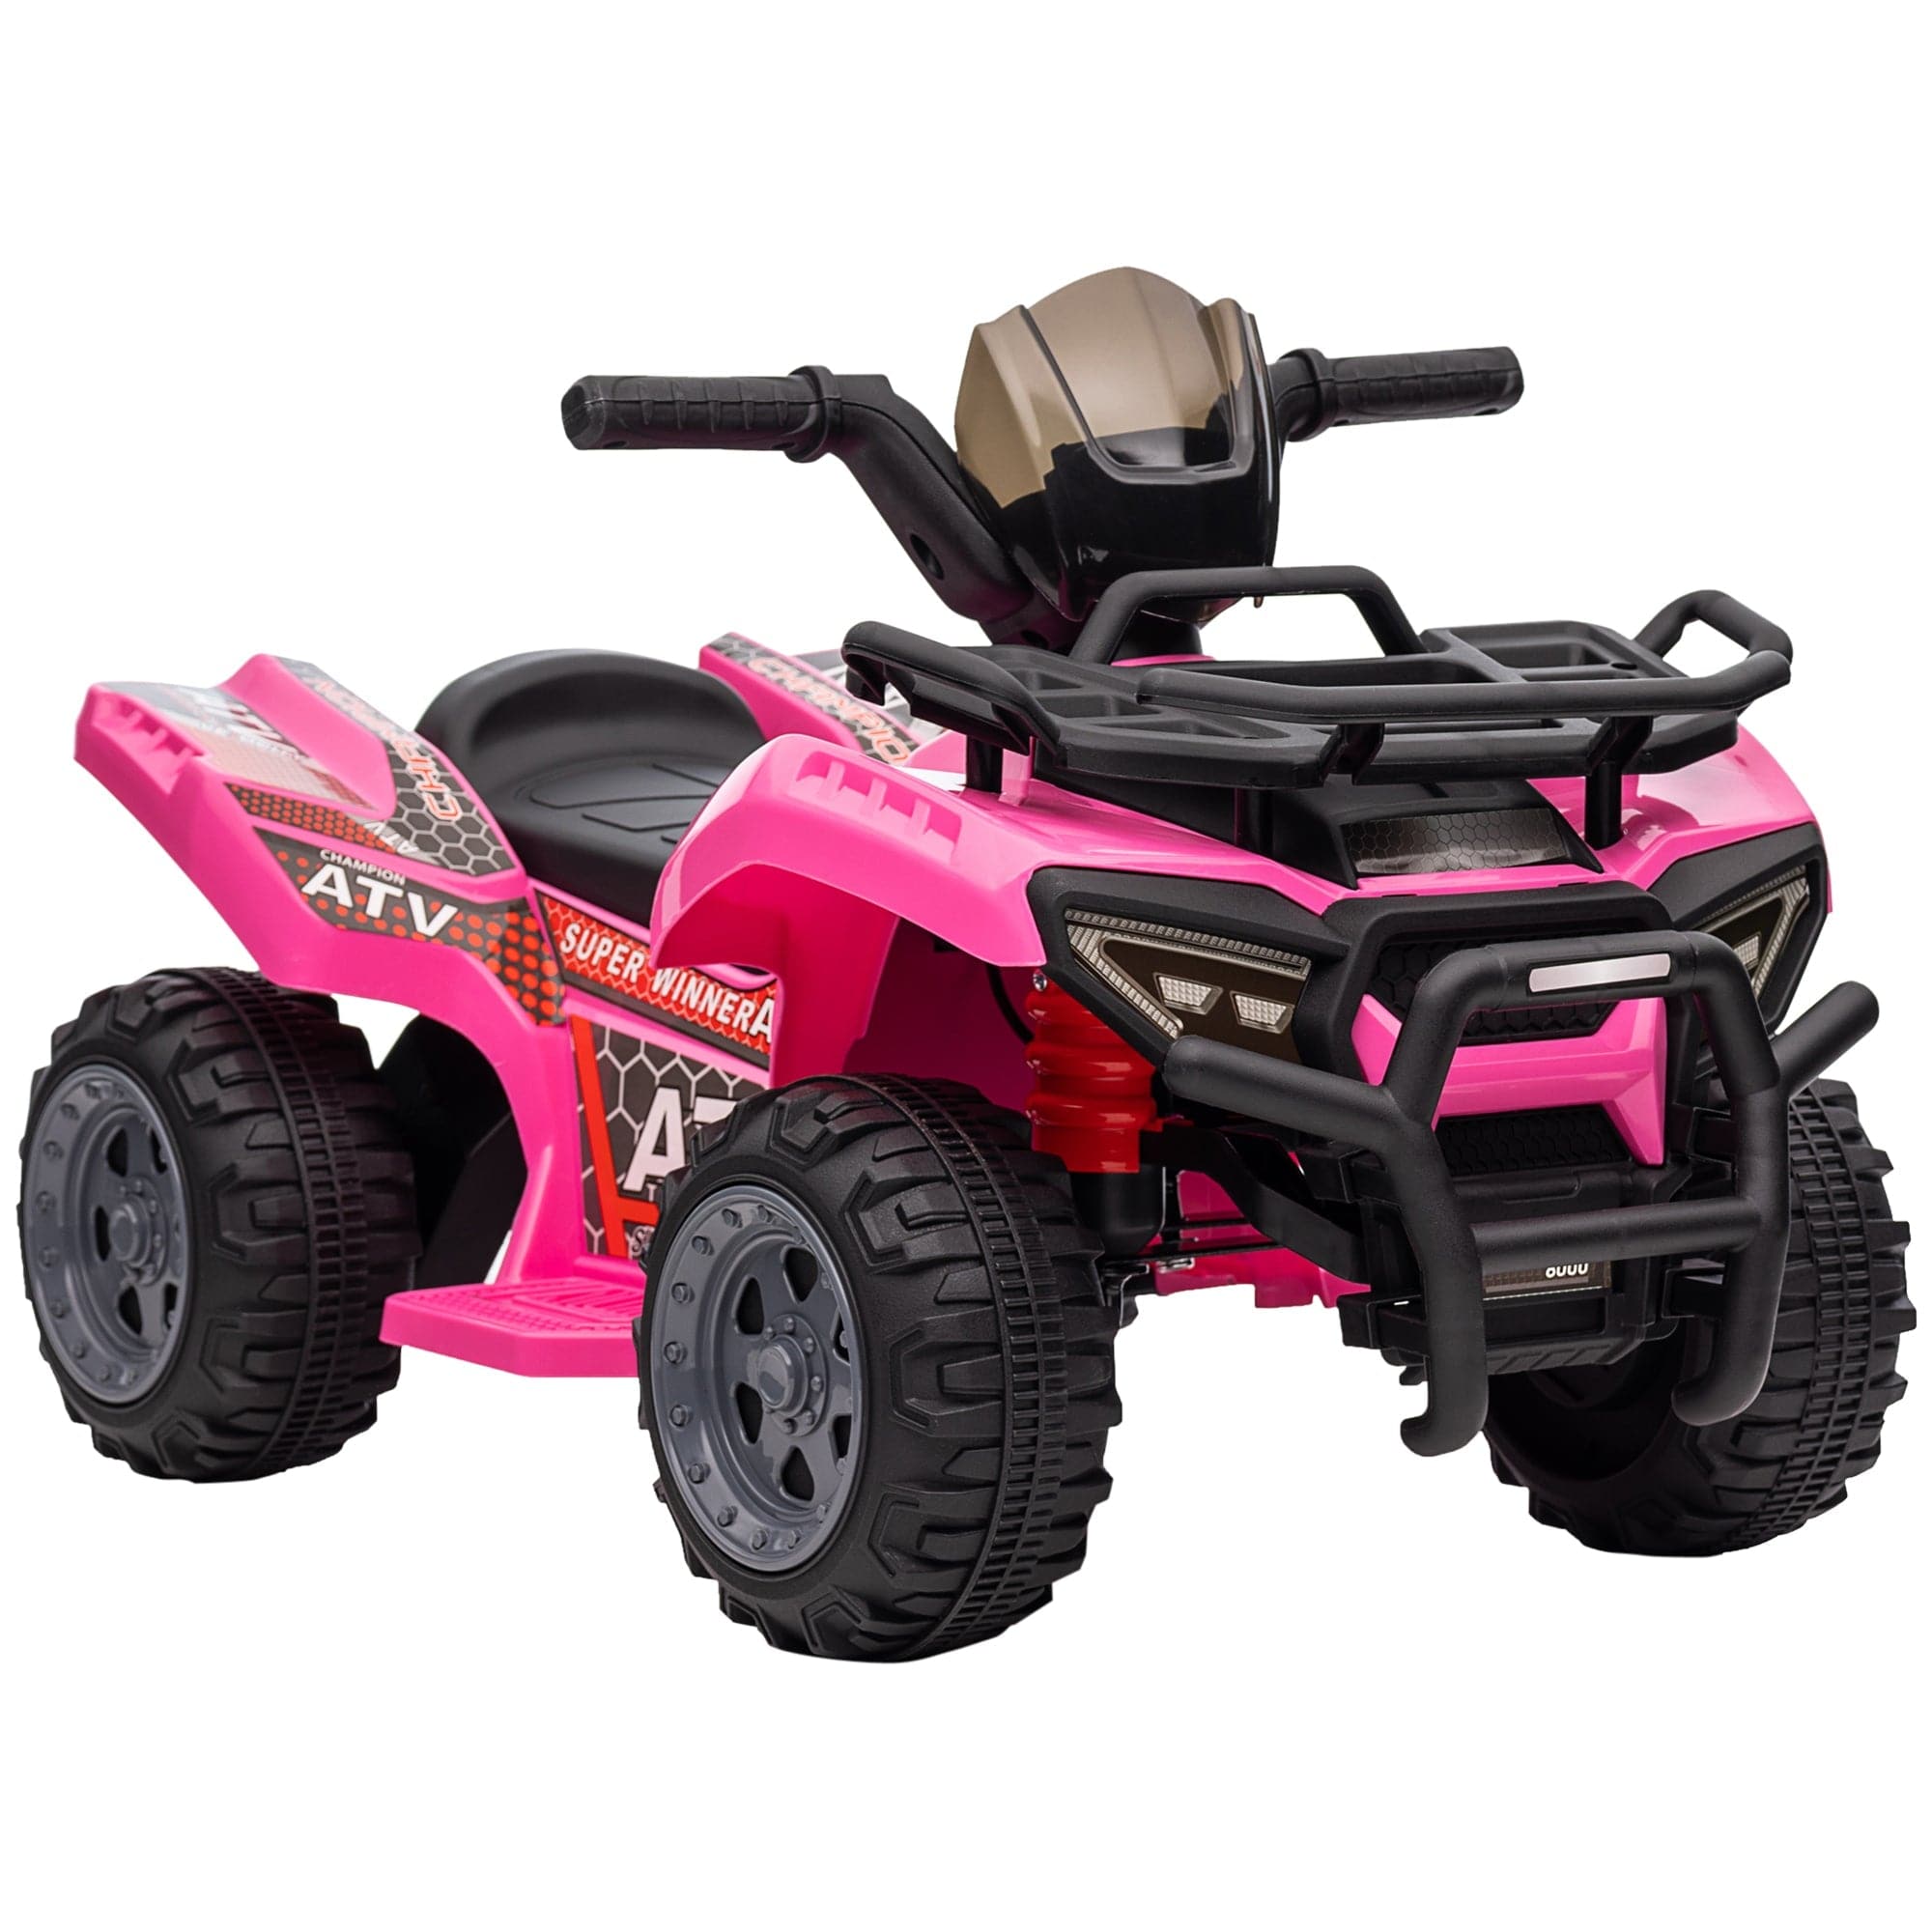 Maplin Plus 6V Kids Electric Ride on Toy ATV Quad Bike with Music & Headlights for 18-36 Months (Pink)